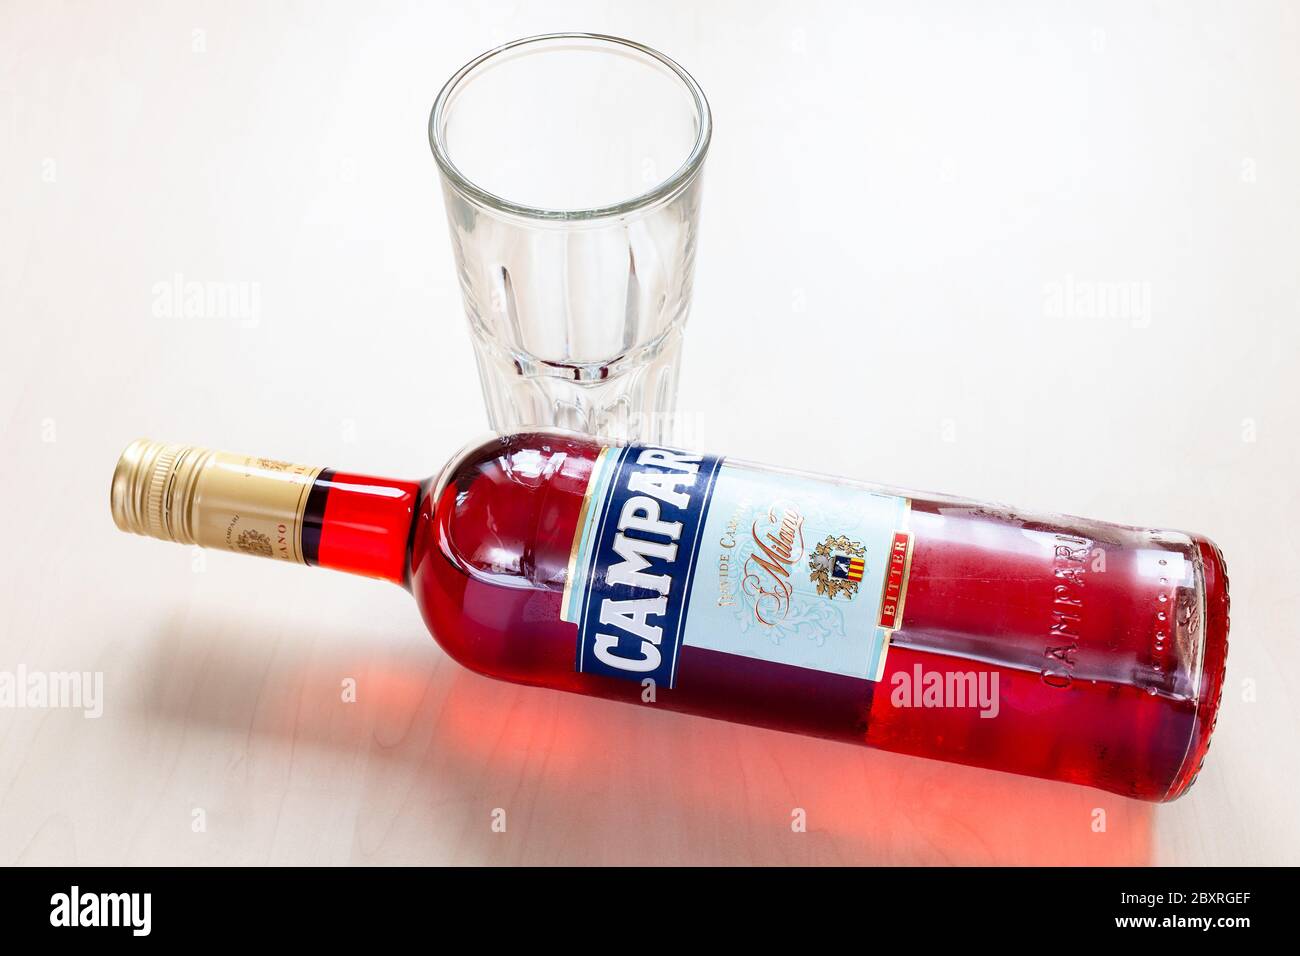 MOSCOW, RUSSIA - JUNE 4, 2020: lying bottle of Campari bitter and empty glass on table. Campari is italian alcoholic liqueur, trademark belong to Davi Stock Photo